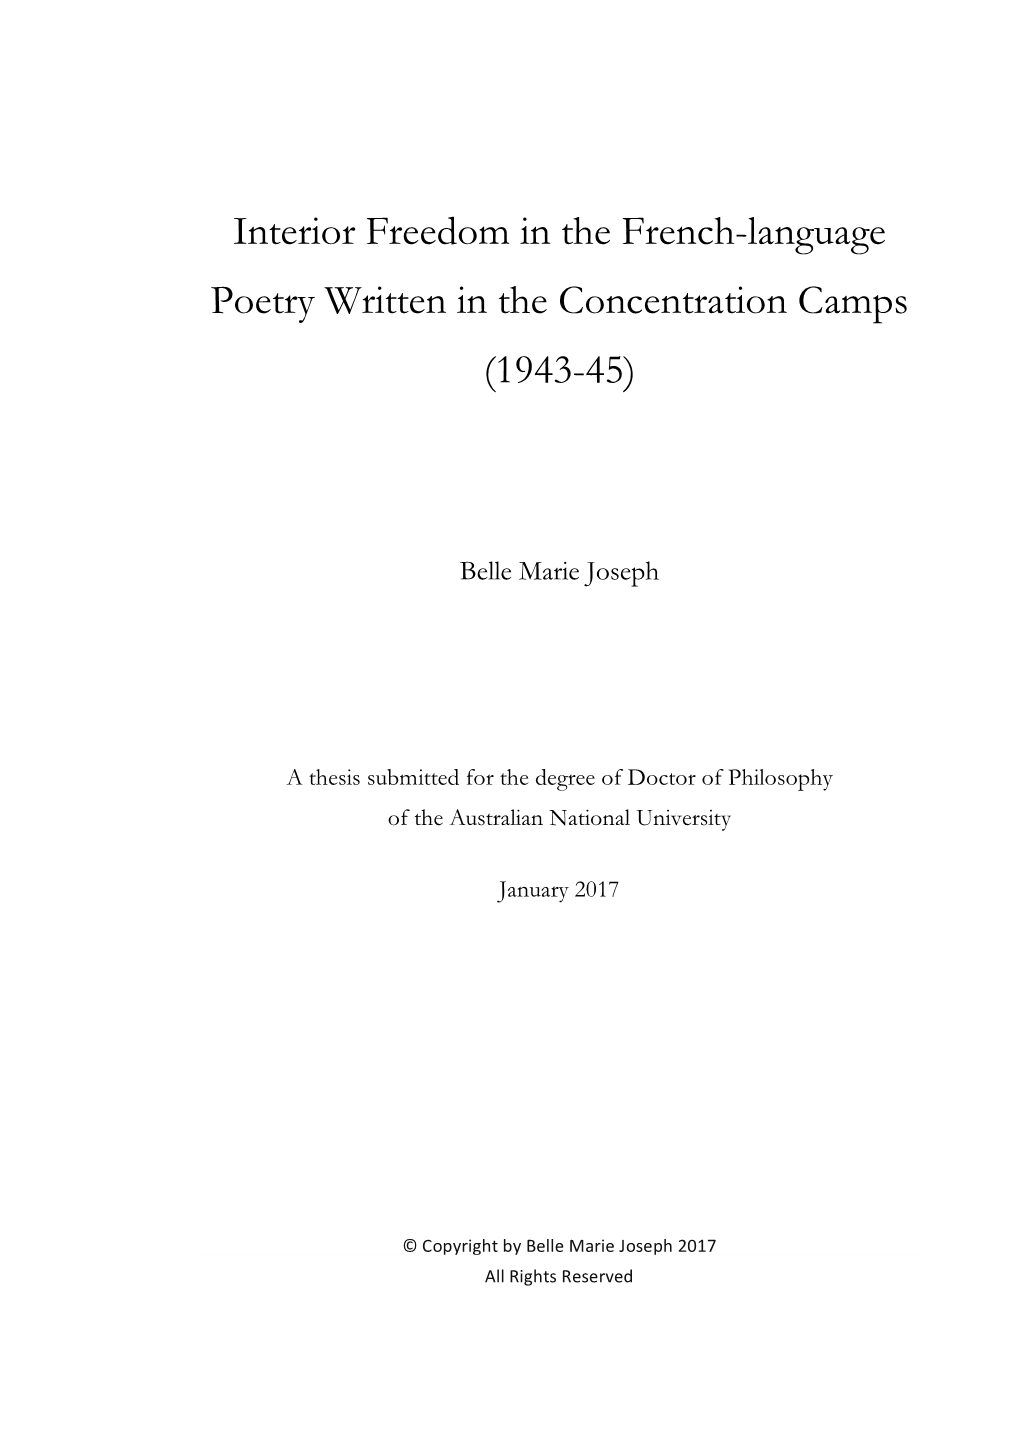 Interior Freedom in the French-Language Poetry Written in the Concentration Camps (1943-45)